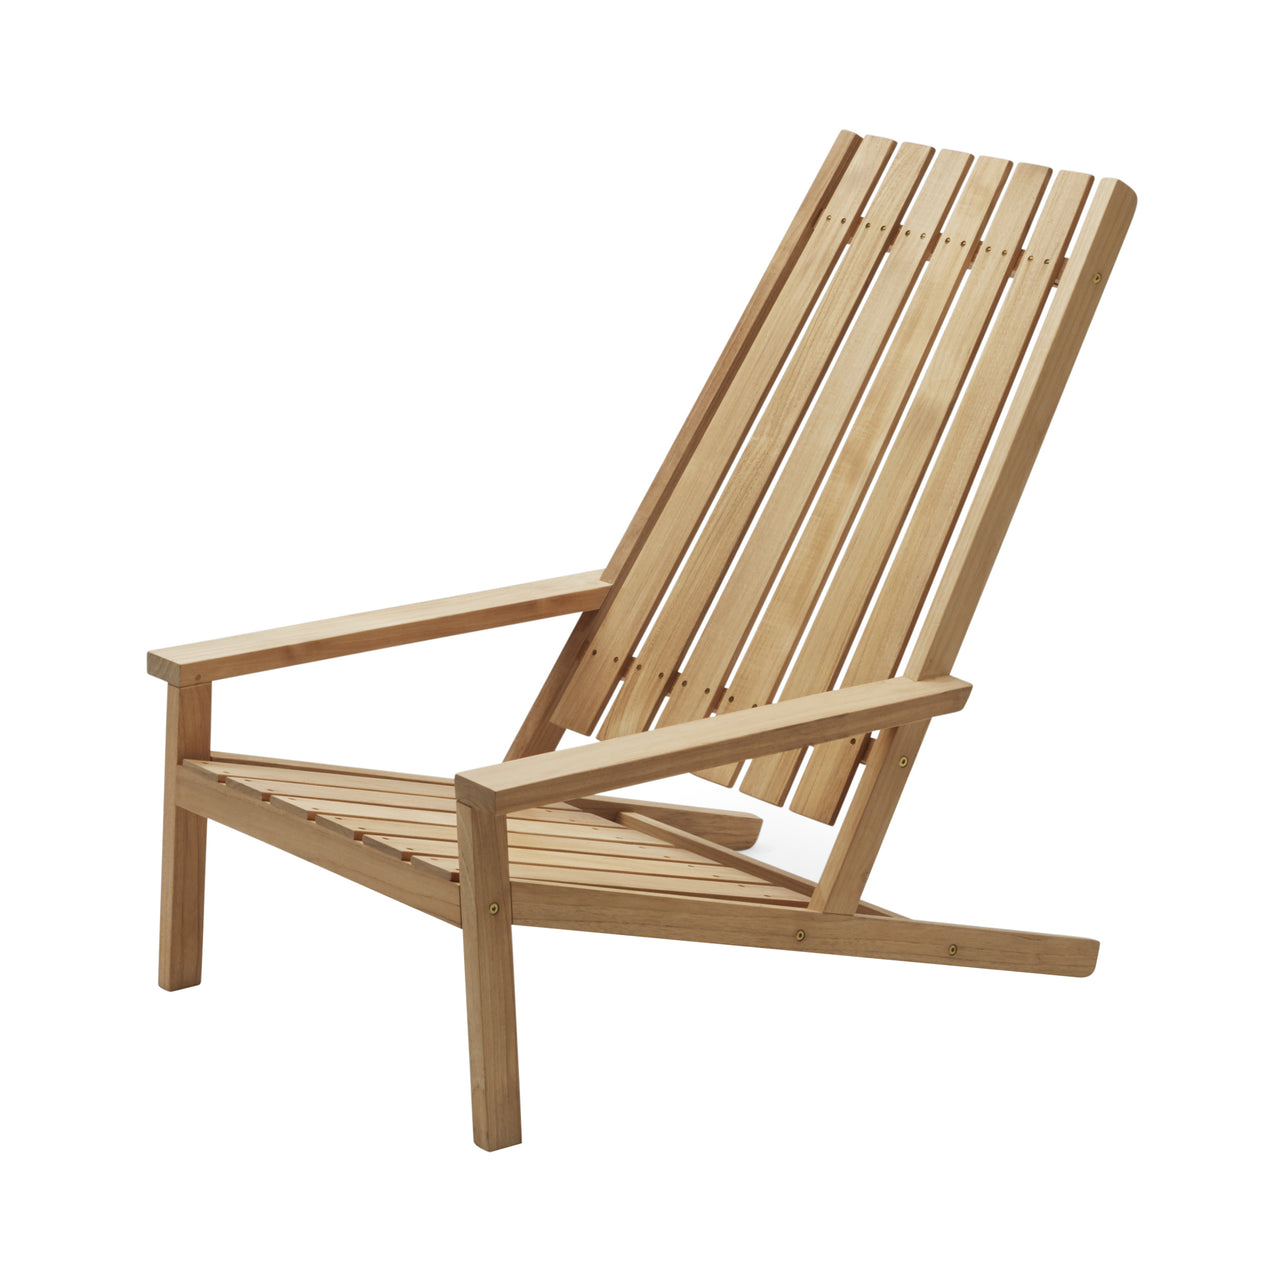 Between Lines Deck Chair: Without Cushion